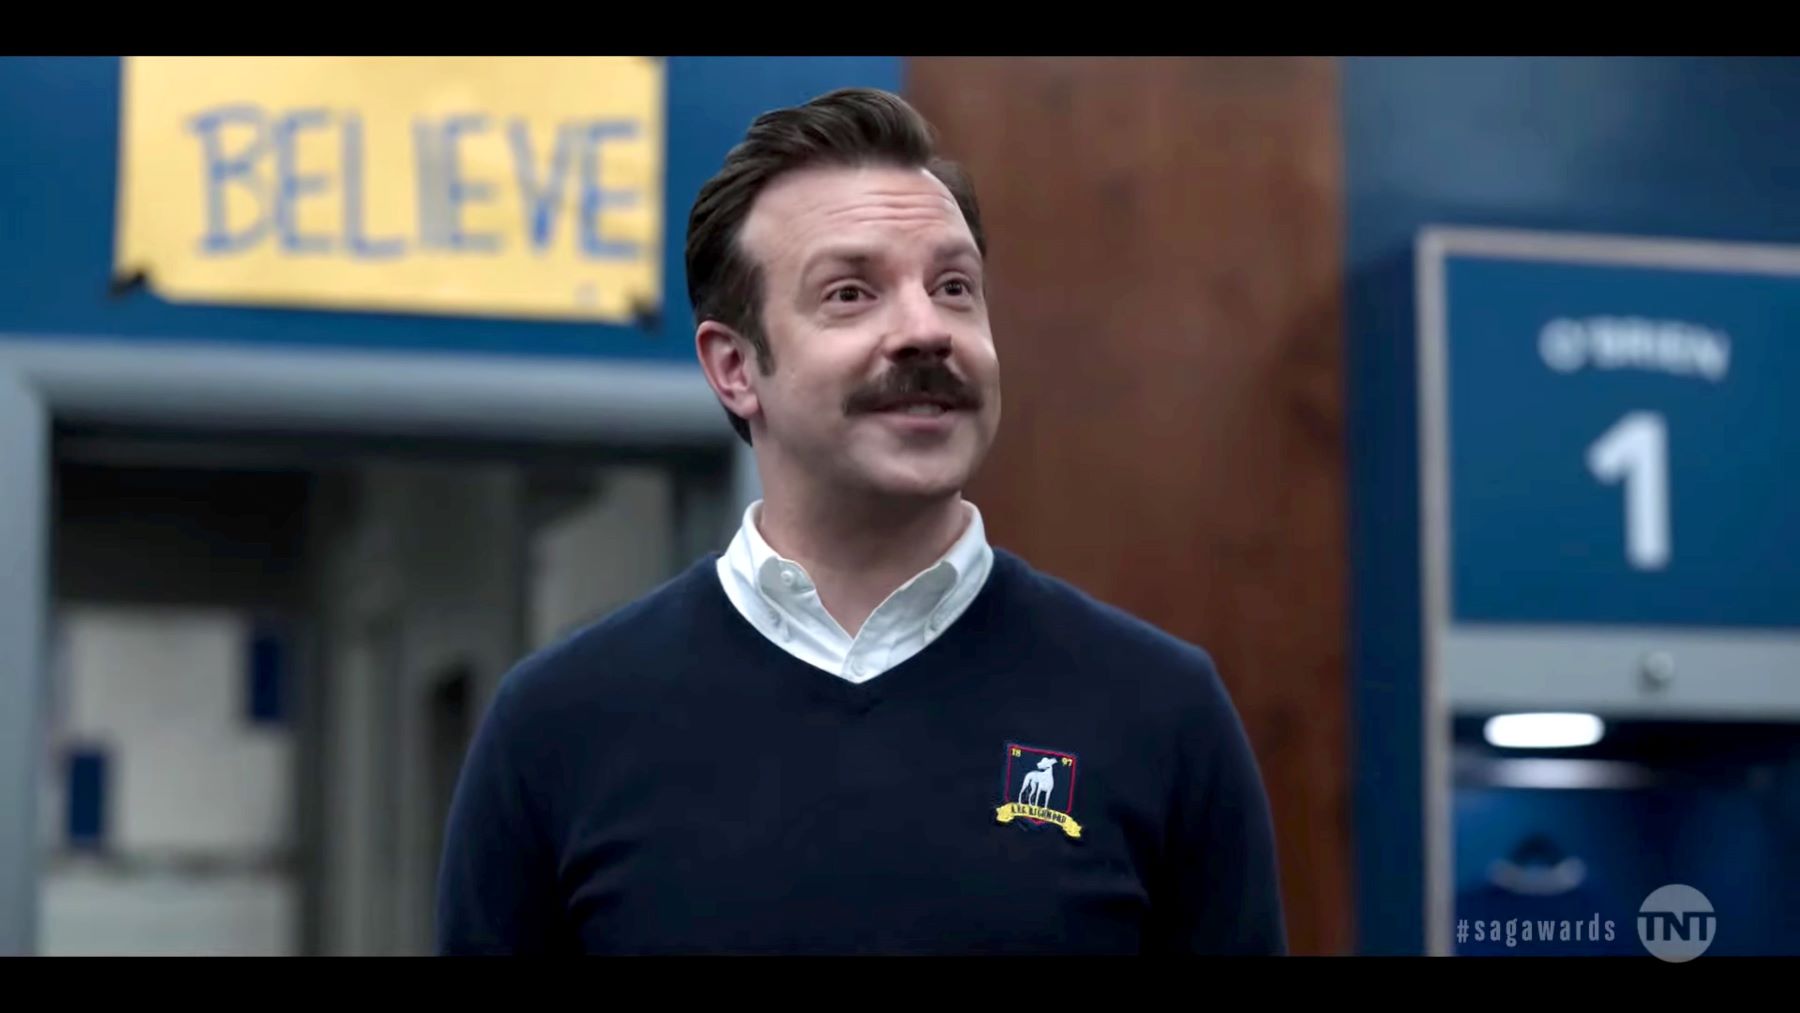 Jason Sudeikis as Ted Lasso on the Apple TV+ show 'Ted Lasso'